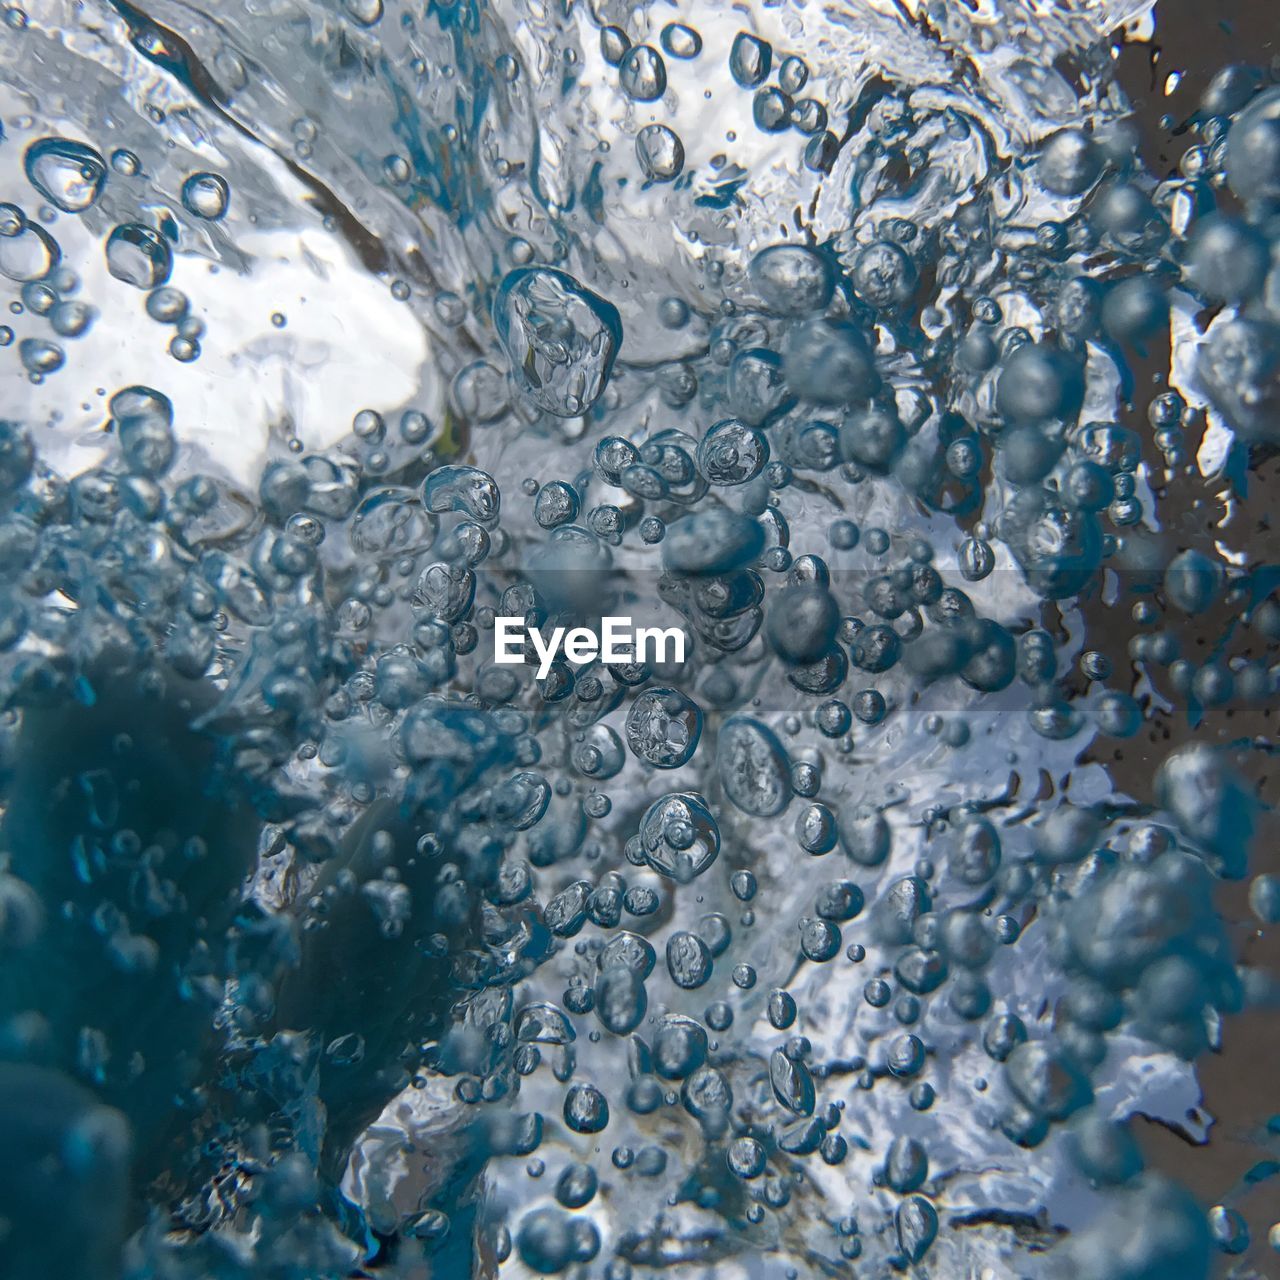 FULL FRAME SHOT OF WATER DROPS ON BLUE SURFACE